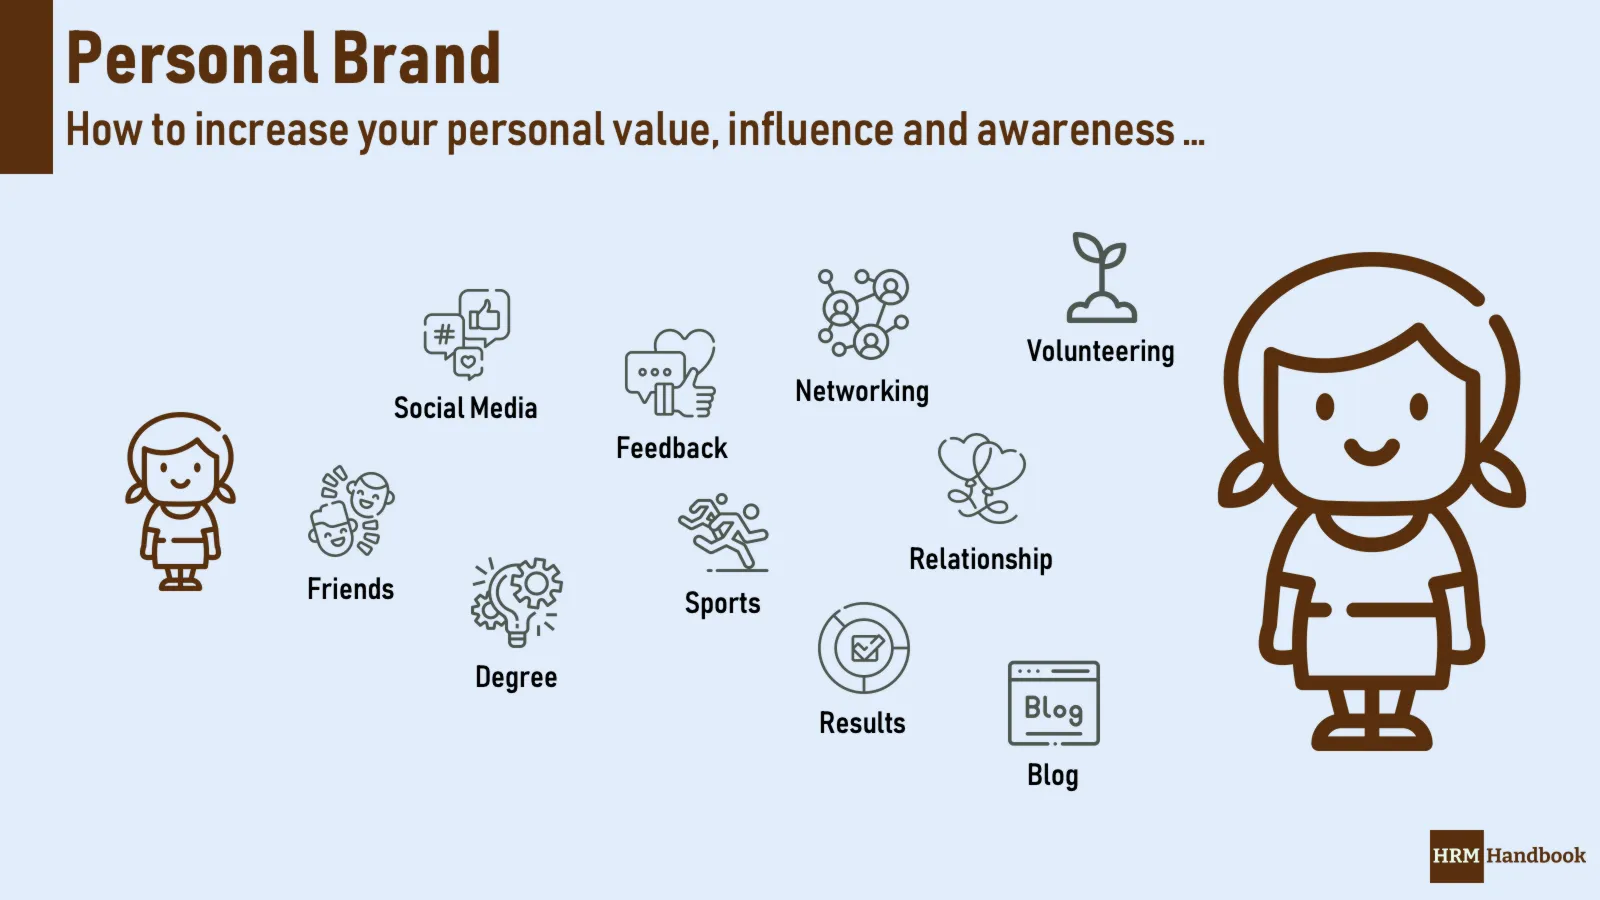 How to improve your personal brand and increase your impact